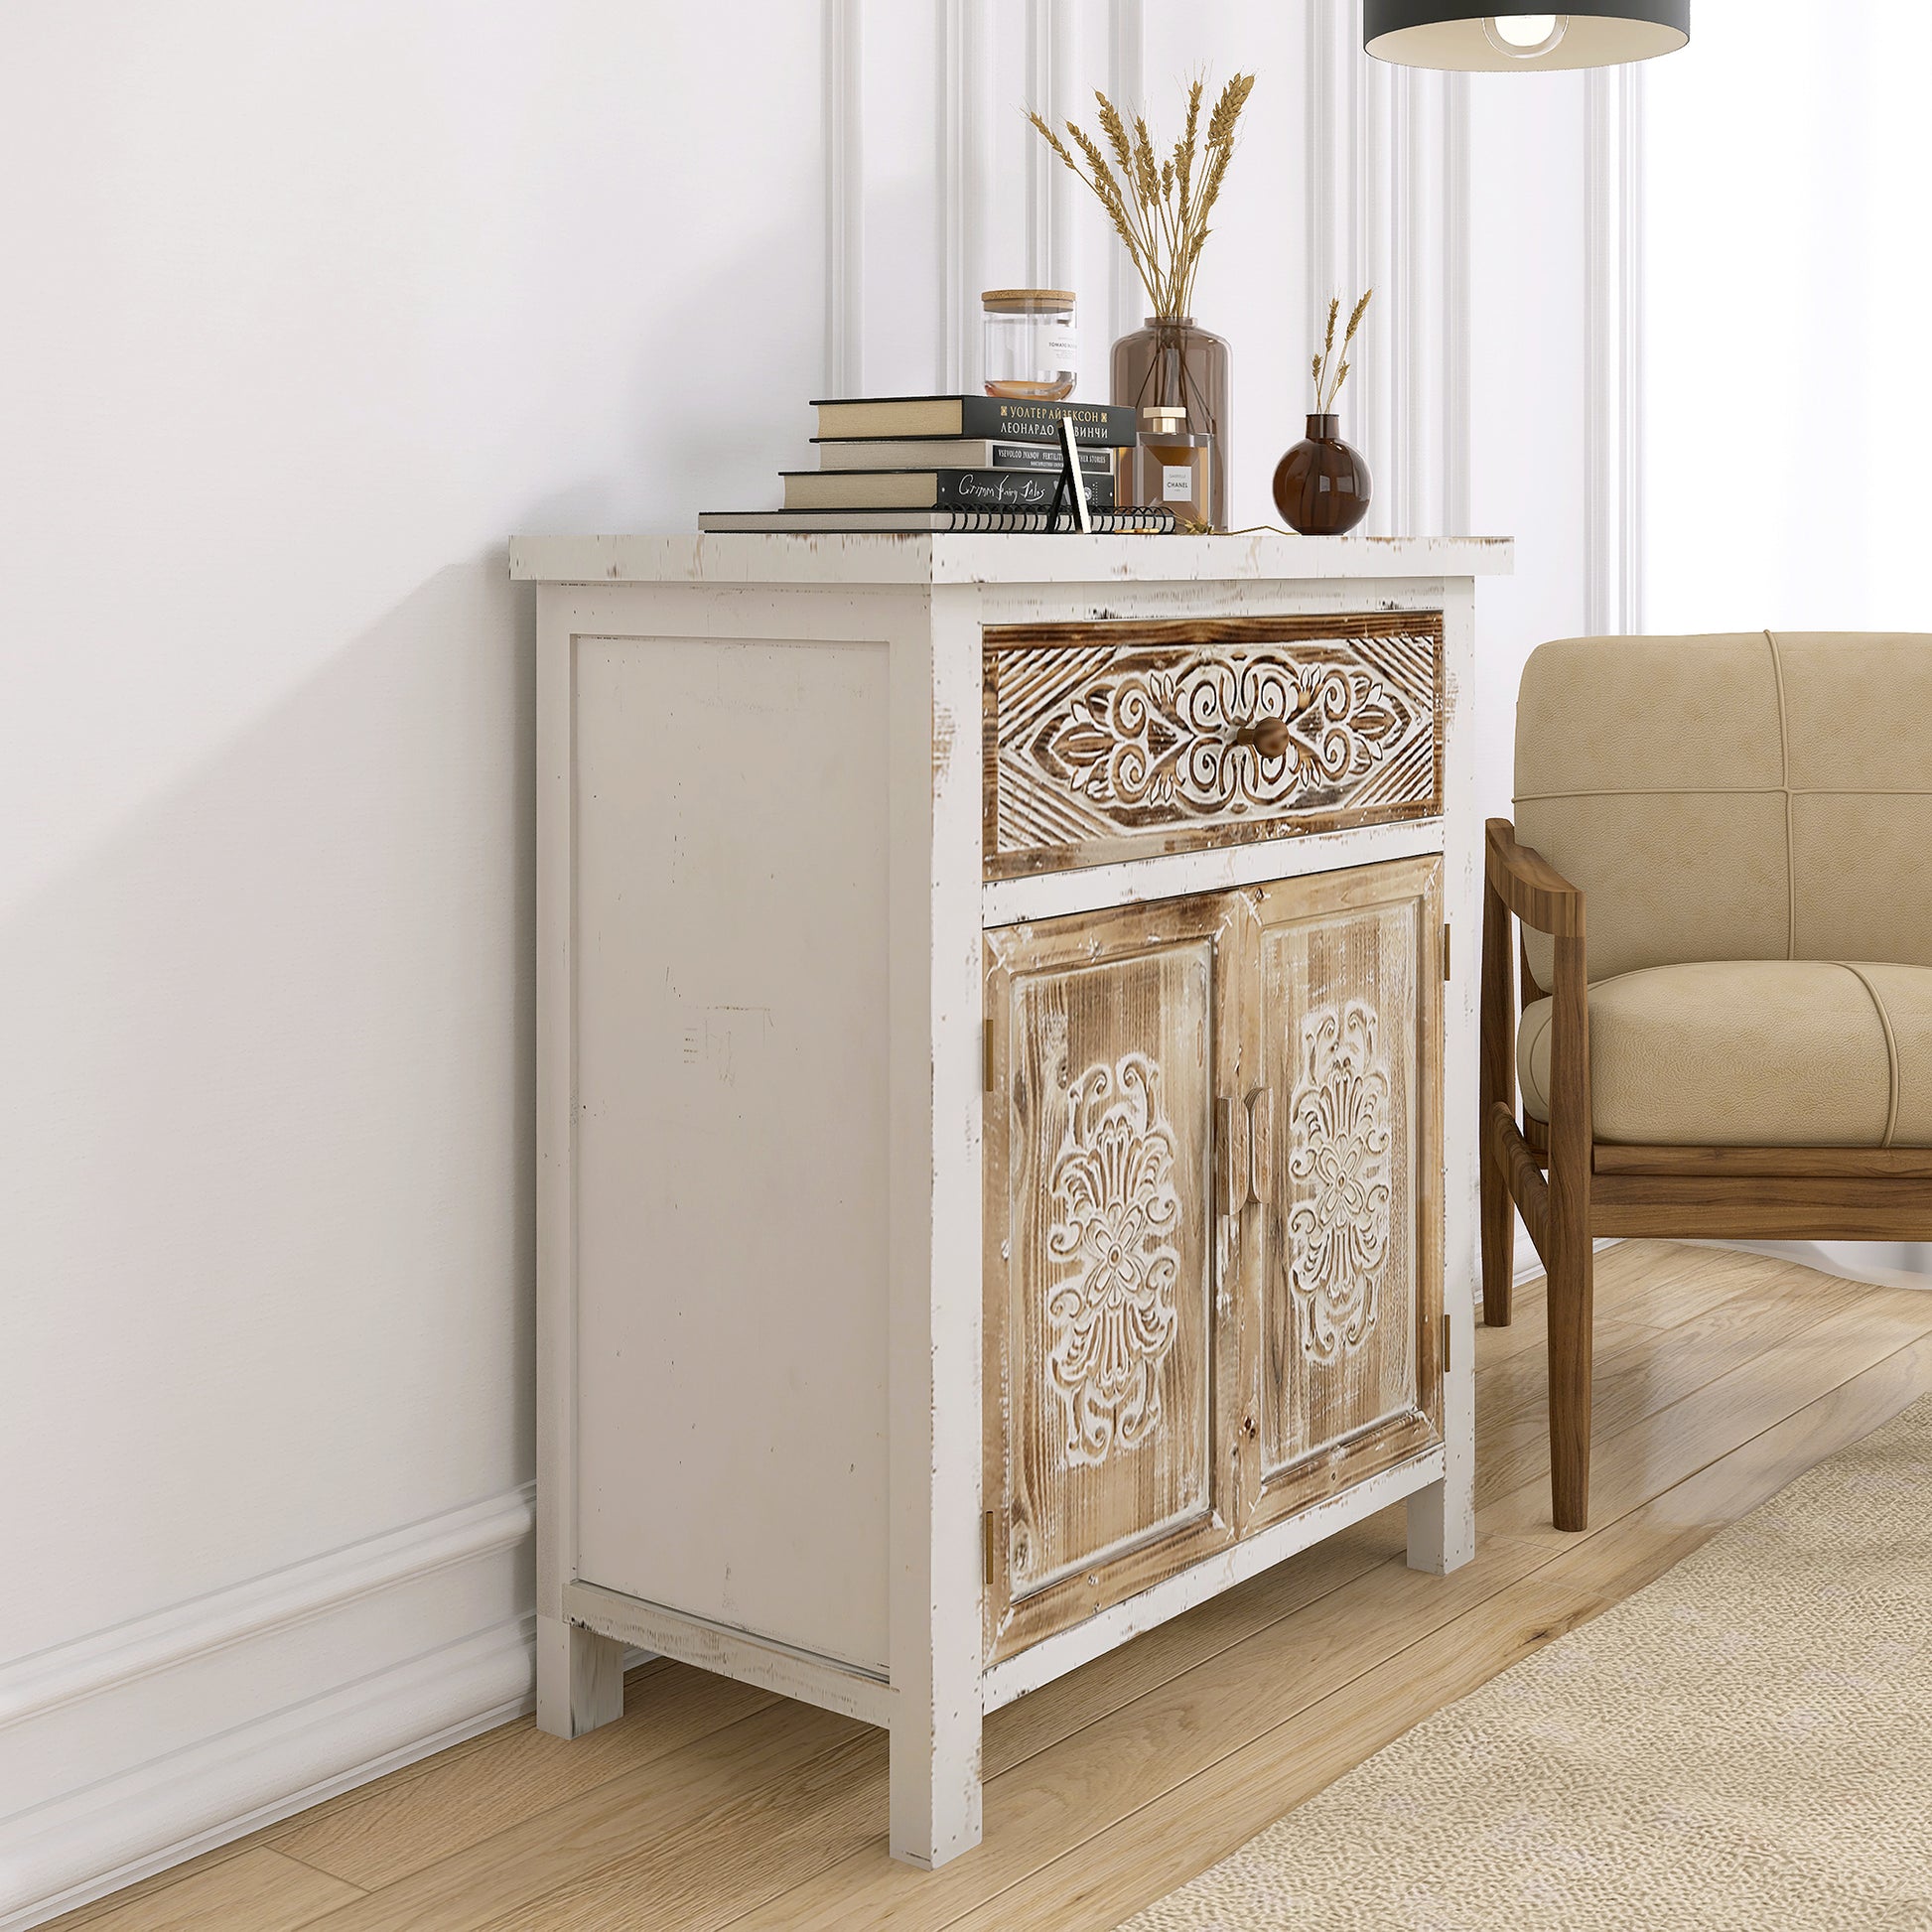 Weathered Wood Cabinet with 1 Drawer and 2 Doors Vintage Accent Storage Cabinet for Entryway, Living Room